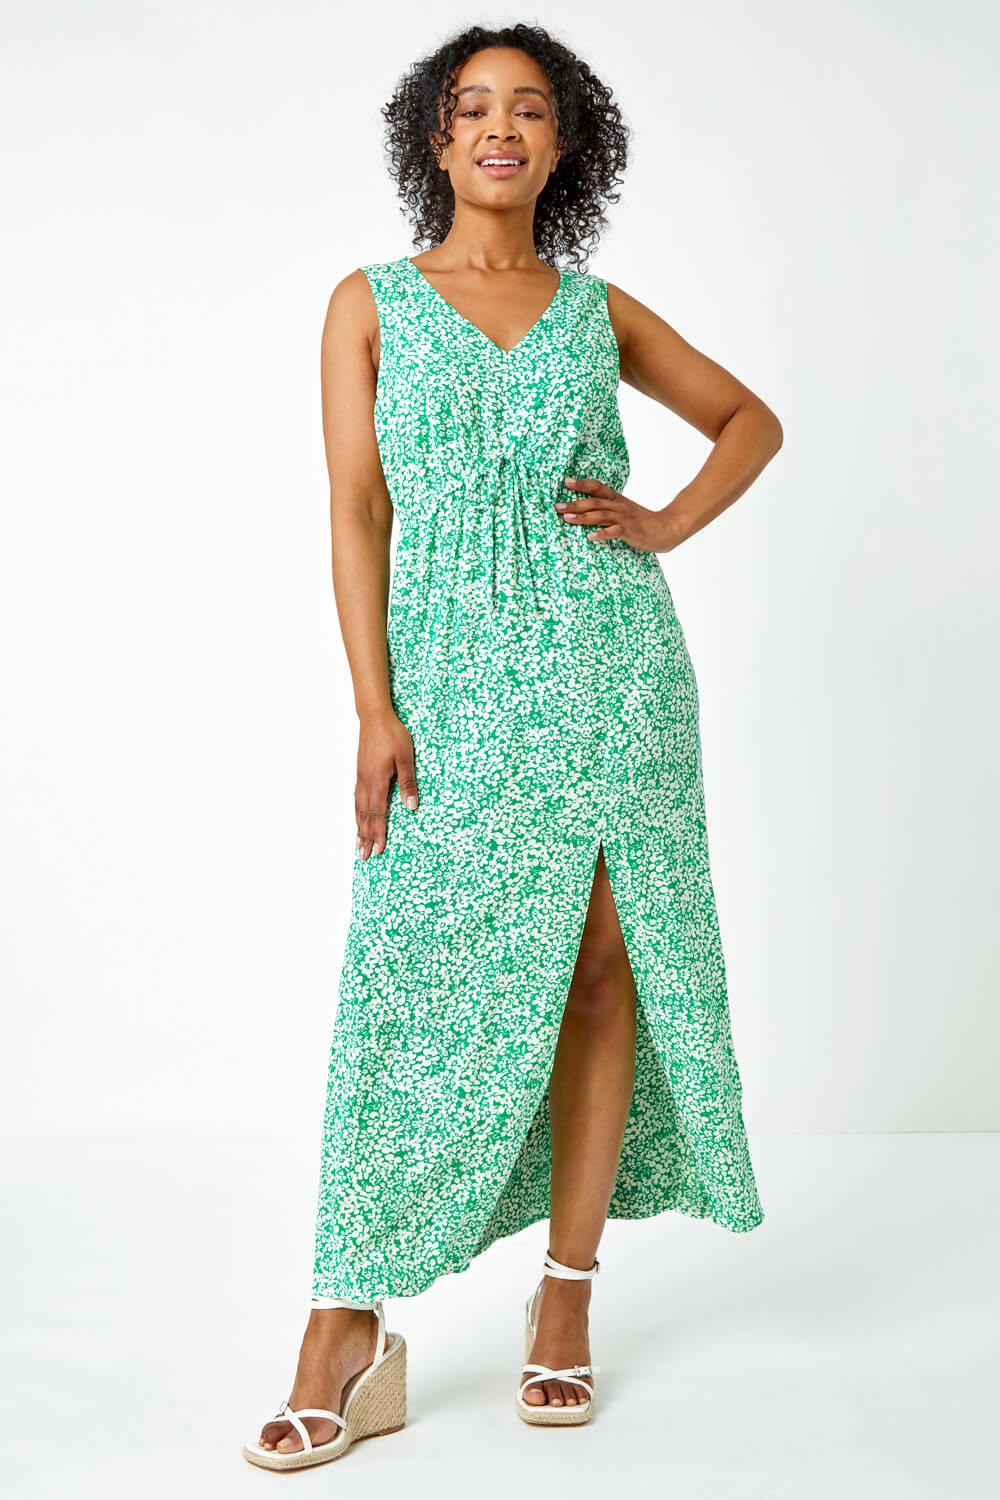 Green Petite Floral Print Stretch Maxi Dress, Image 2 of 5